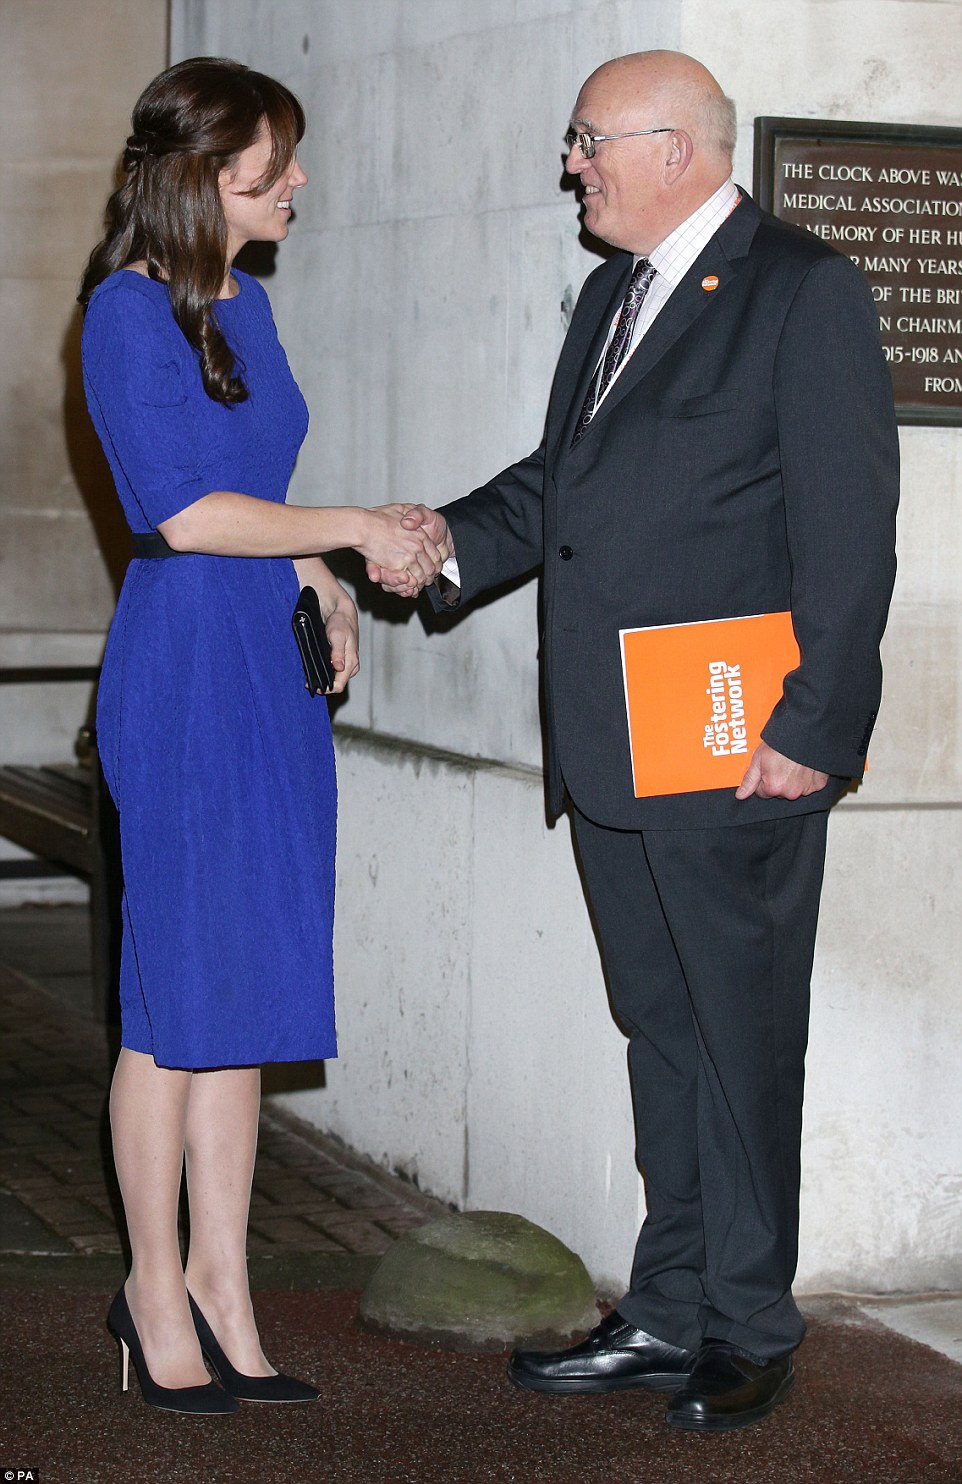 CASA REAL BRITÁNICA - Página 8 2E89D5C300000578-3322156-Kate_is_greeted_by_Kevin_Williams_chief_executive_of_The_Fosteri-a-142_1447783354457